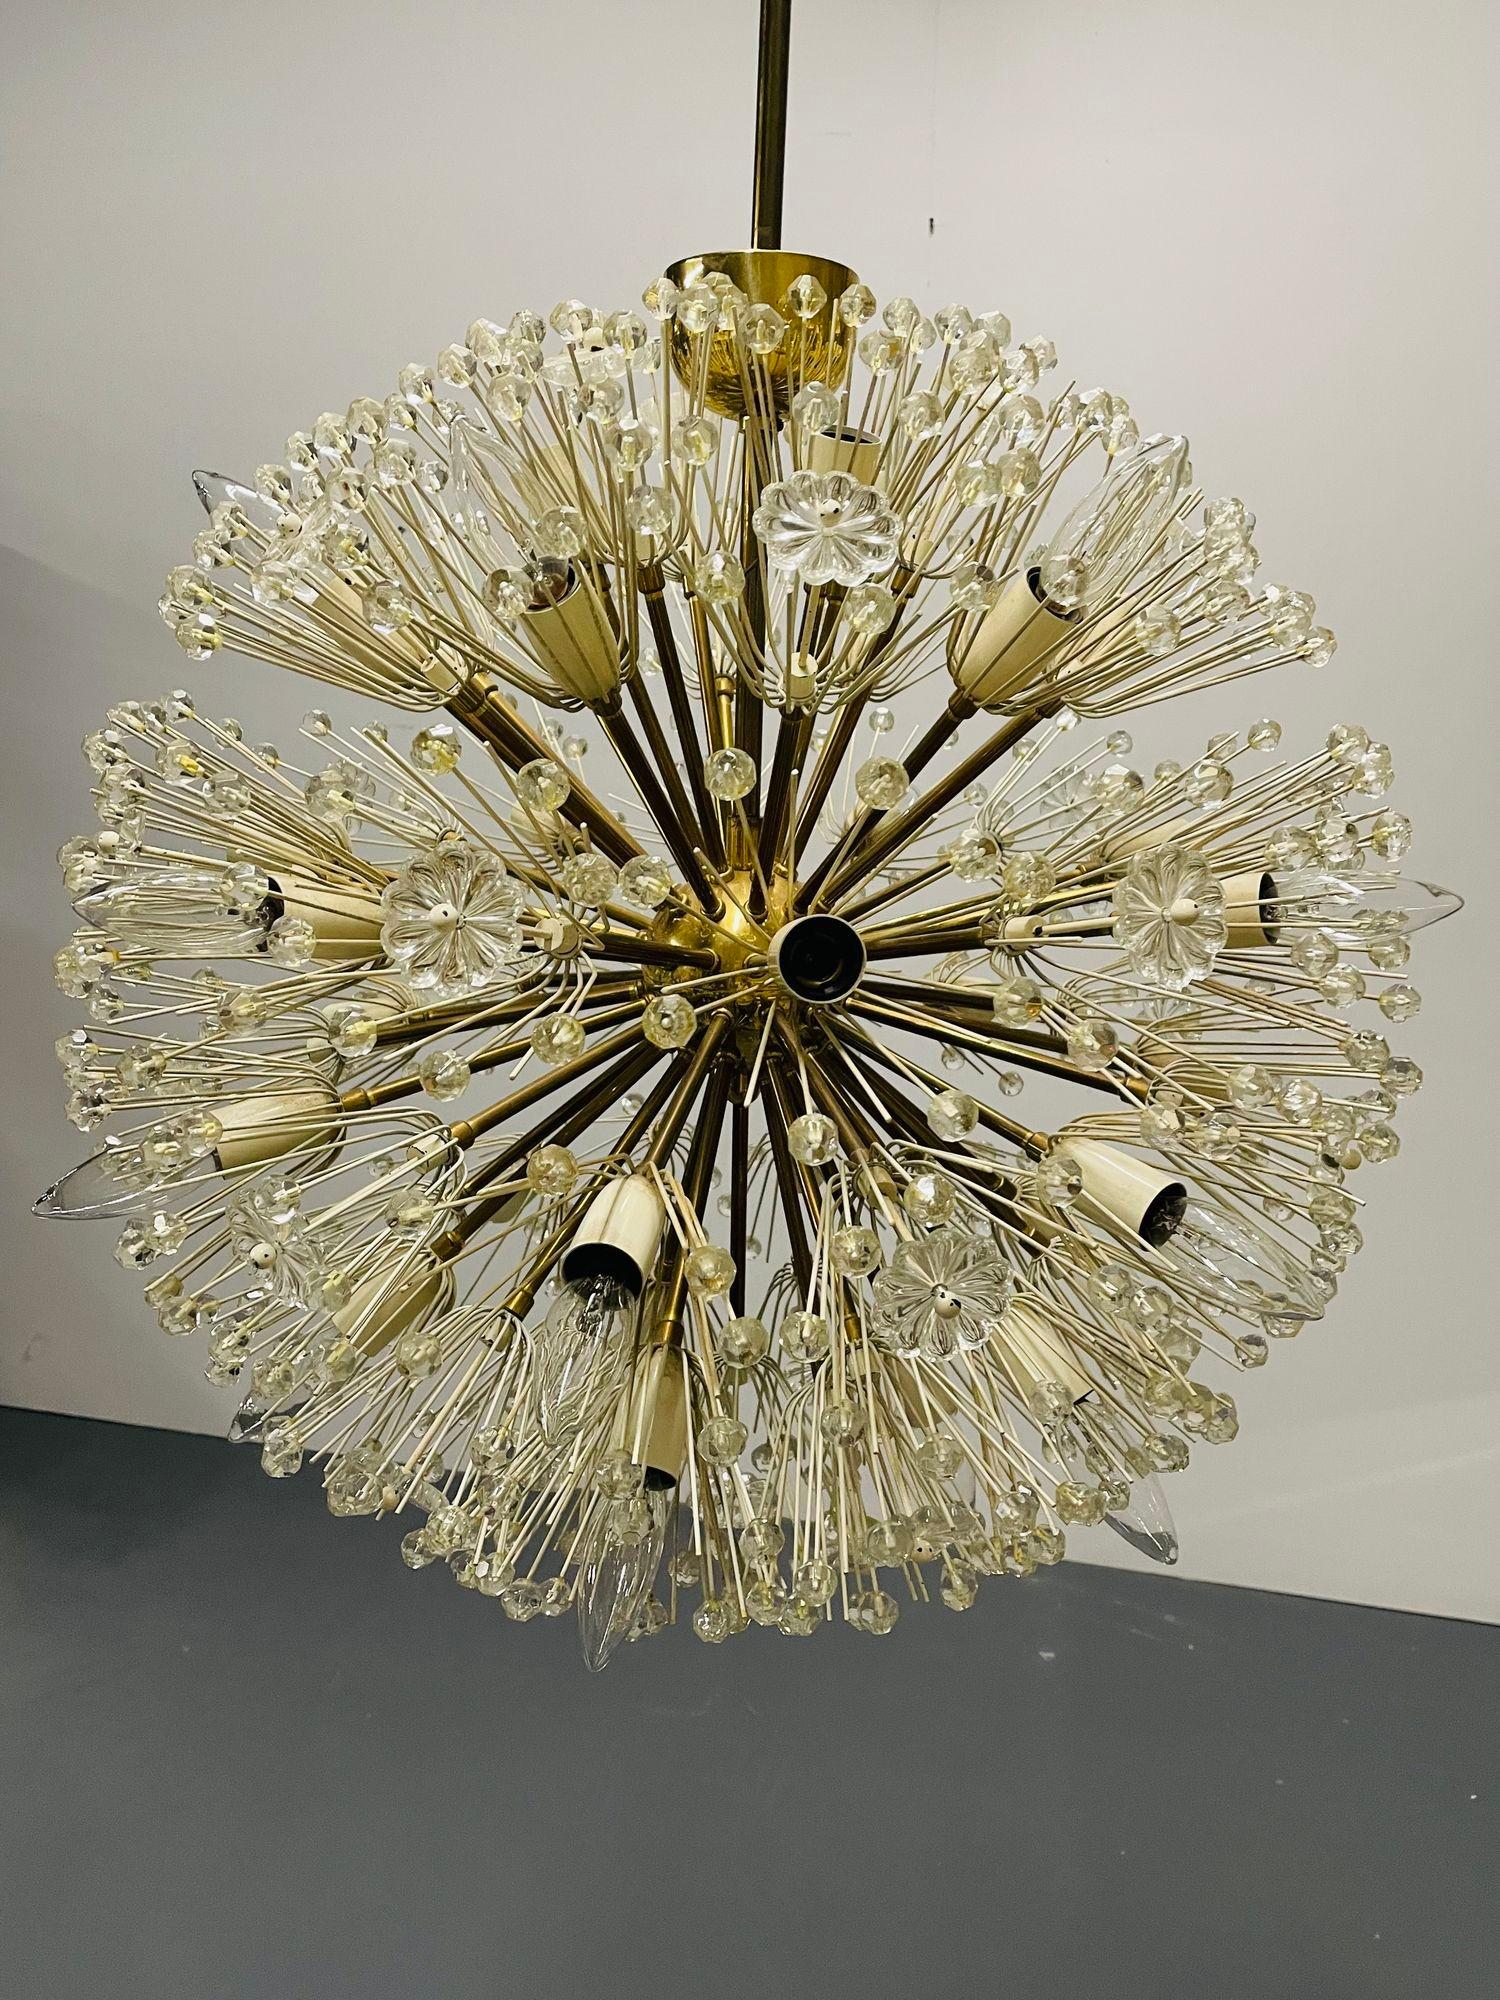 Mid-20th Century Pair of Mid-Century Modern Austrian Circular Chandeliers, Brass and Glass, 1960s For Sale